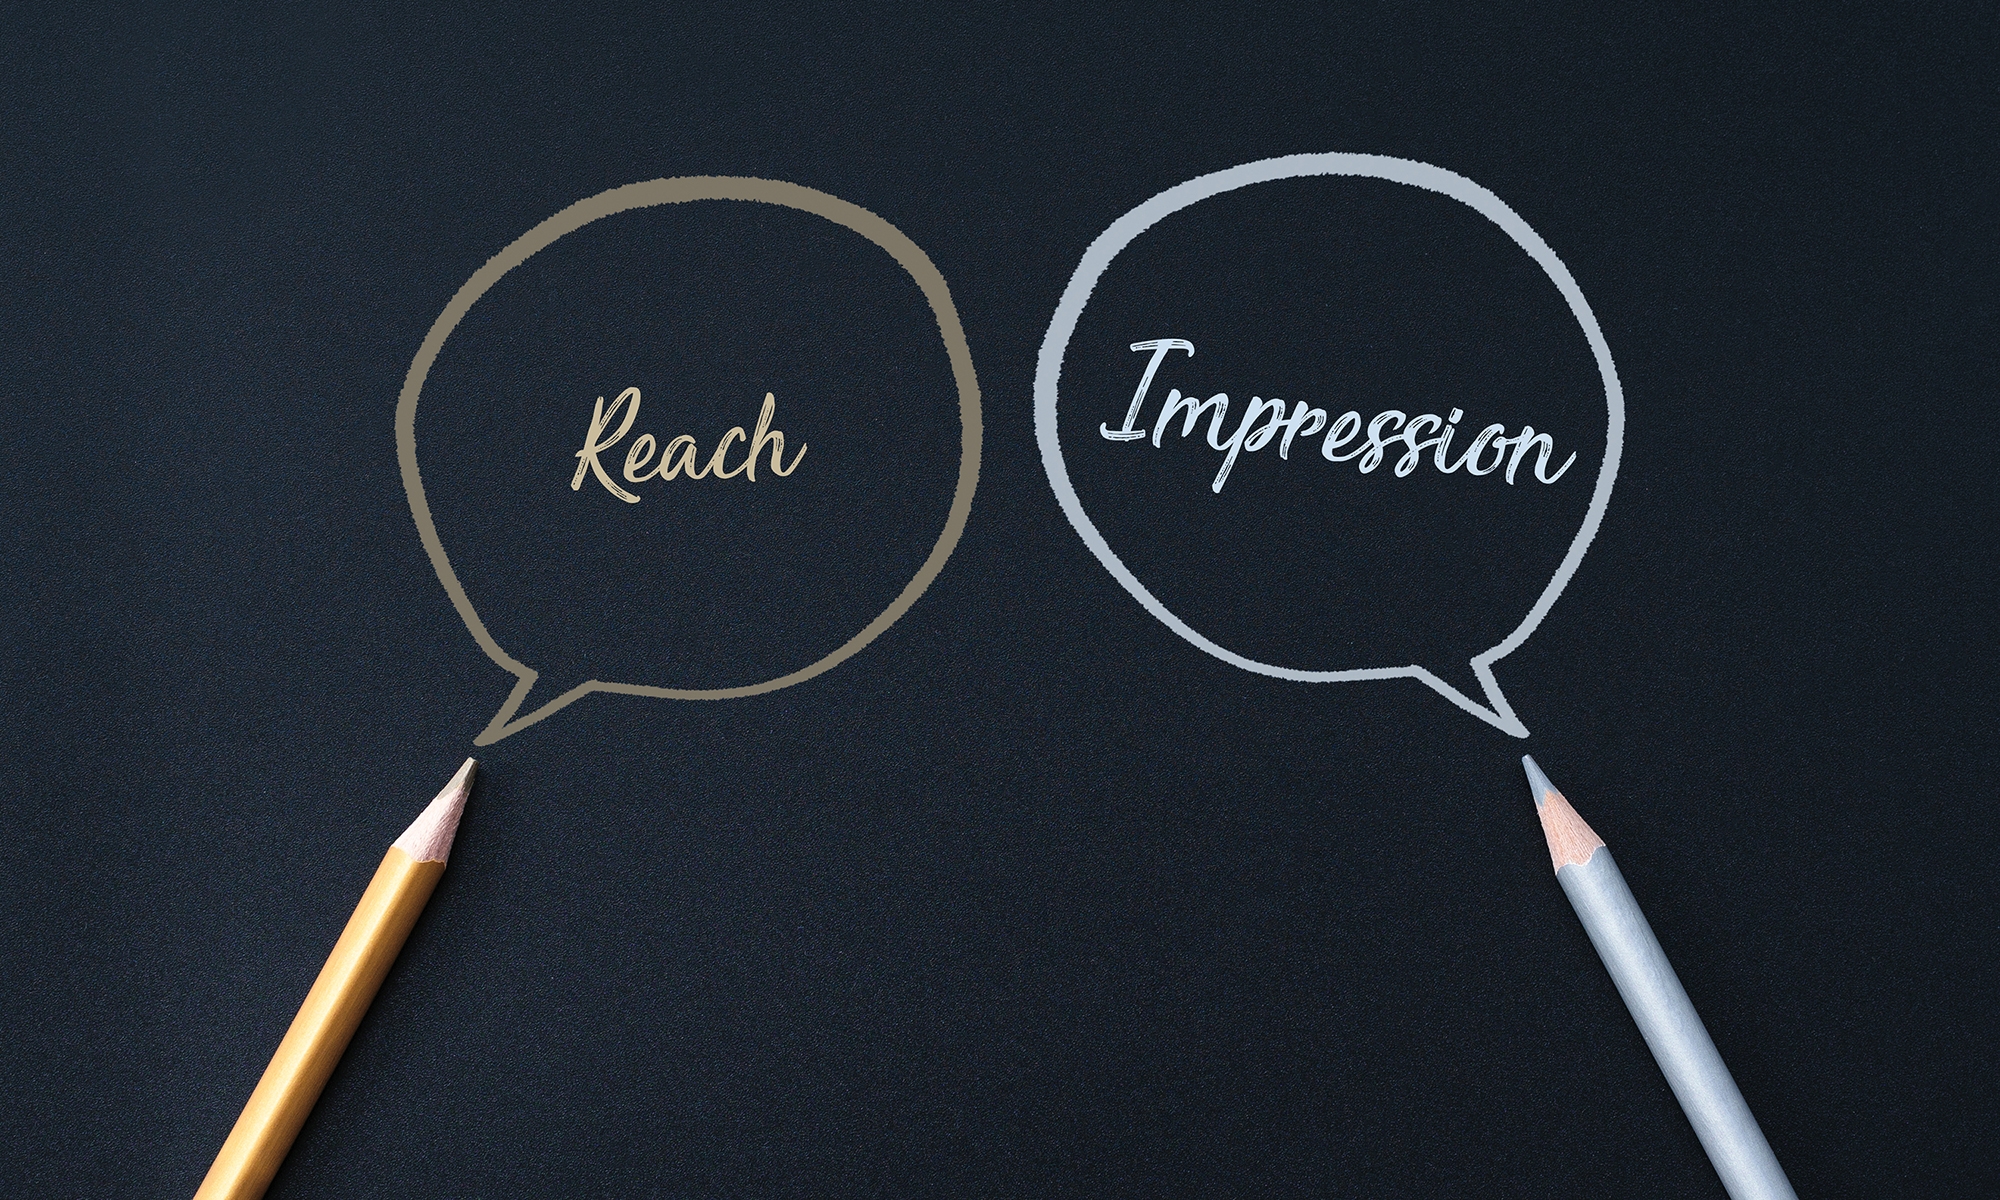 Reach vs. Impressions — What’s the Difference?